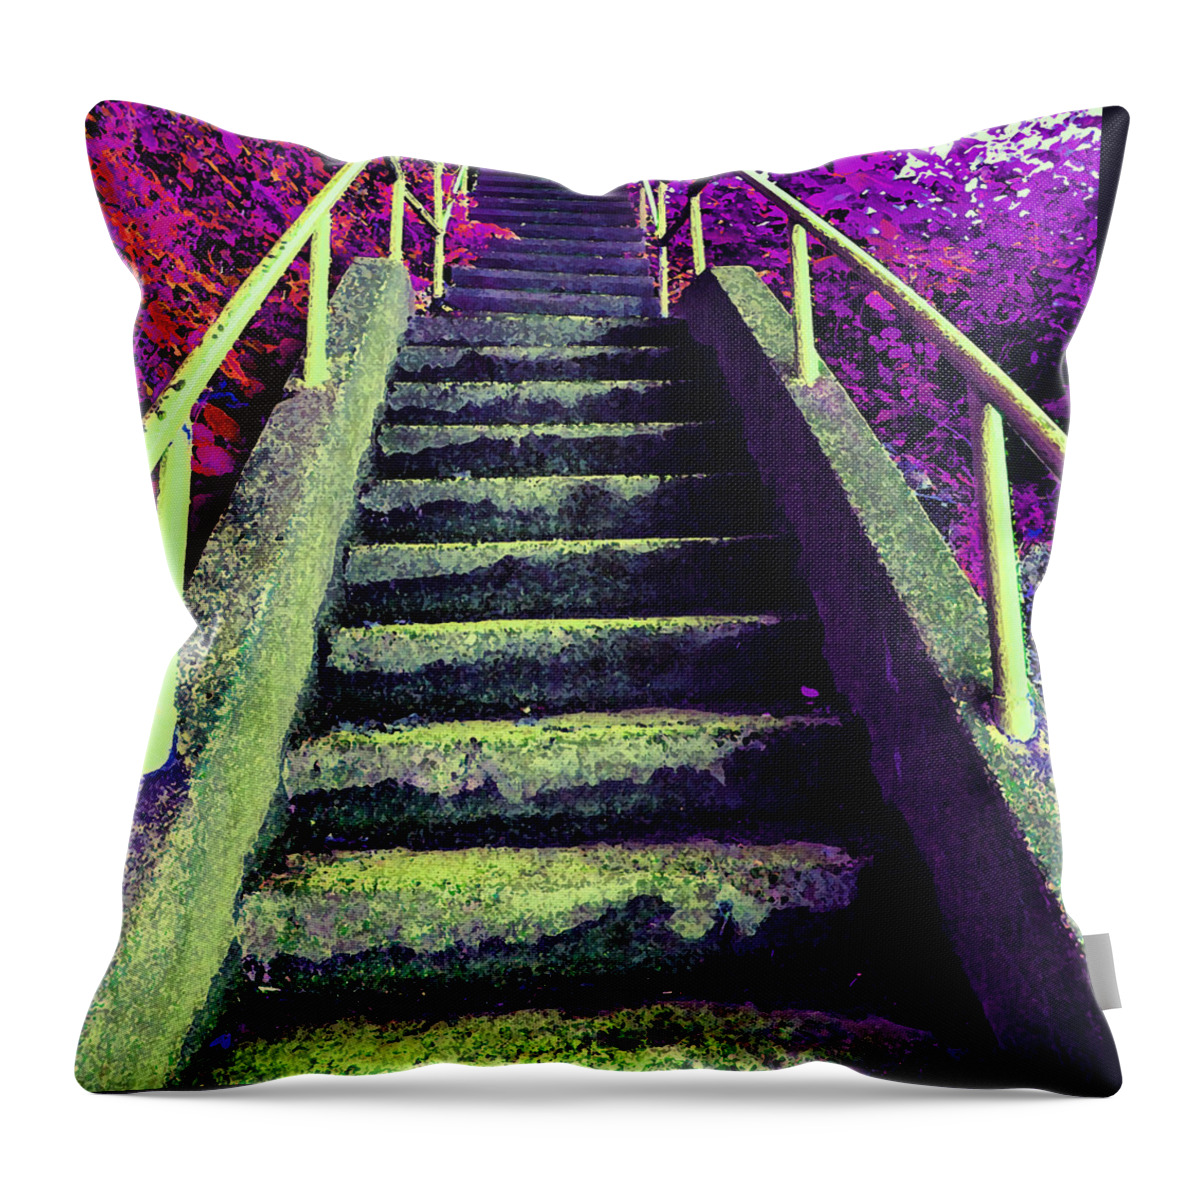 Stairs Throw Pillow featuring the photograph A Long Way 3 by Laurie Tsemak